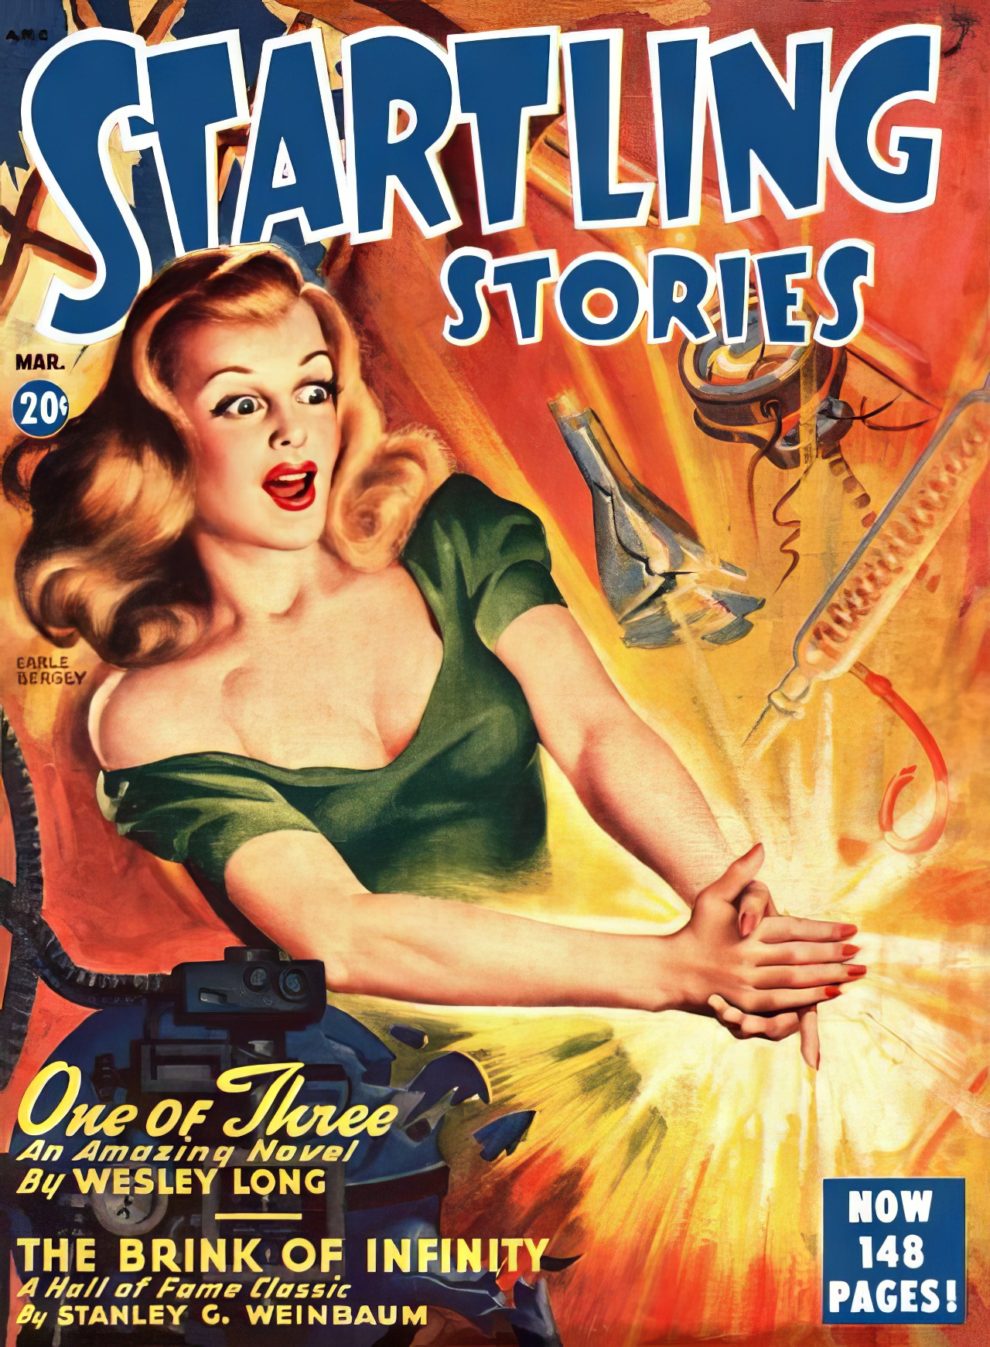 Startling Stories Covers 1940s 41 